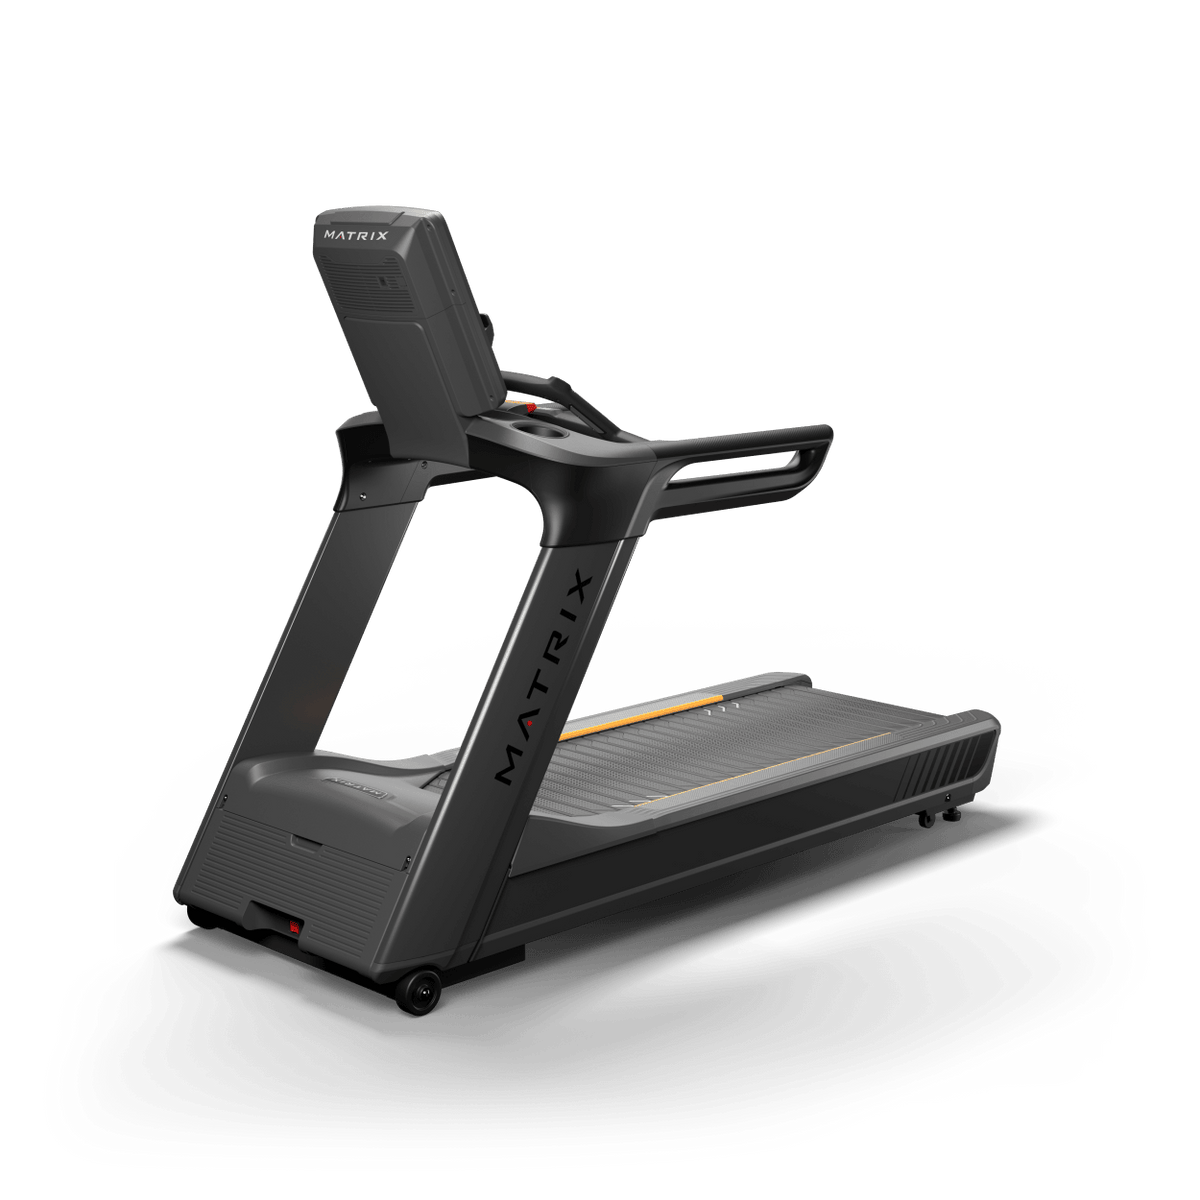 Matrix Fitness Performance Plus Treadmill with Premium LED Console rear view | Fitness Experience